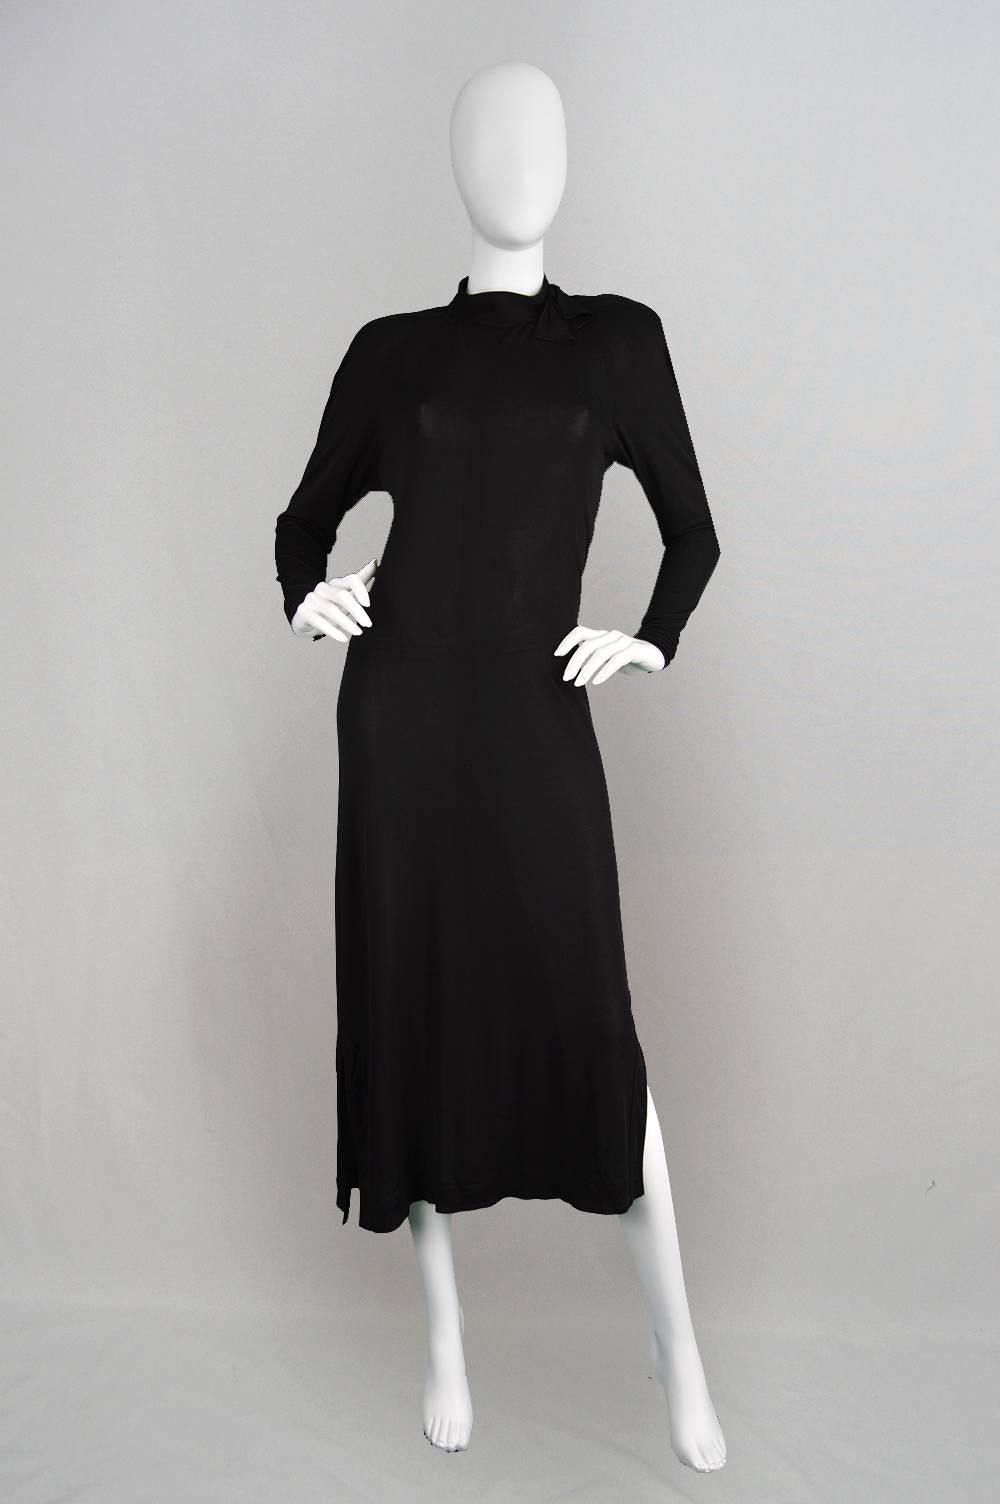 A timeless and elegant vintage Jean Muir dress from the 1980s with a high neck that has topstitched bowtie at the neck and lightly padded, darted shoulders that flow down to long slim, slightly dolman sleeves. The rayon jersey gives such amazing